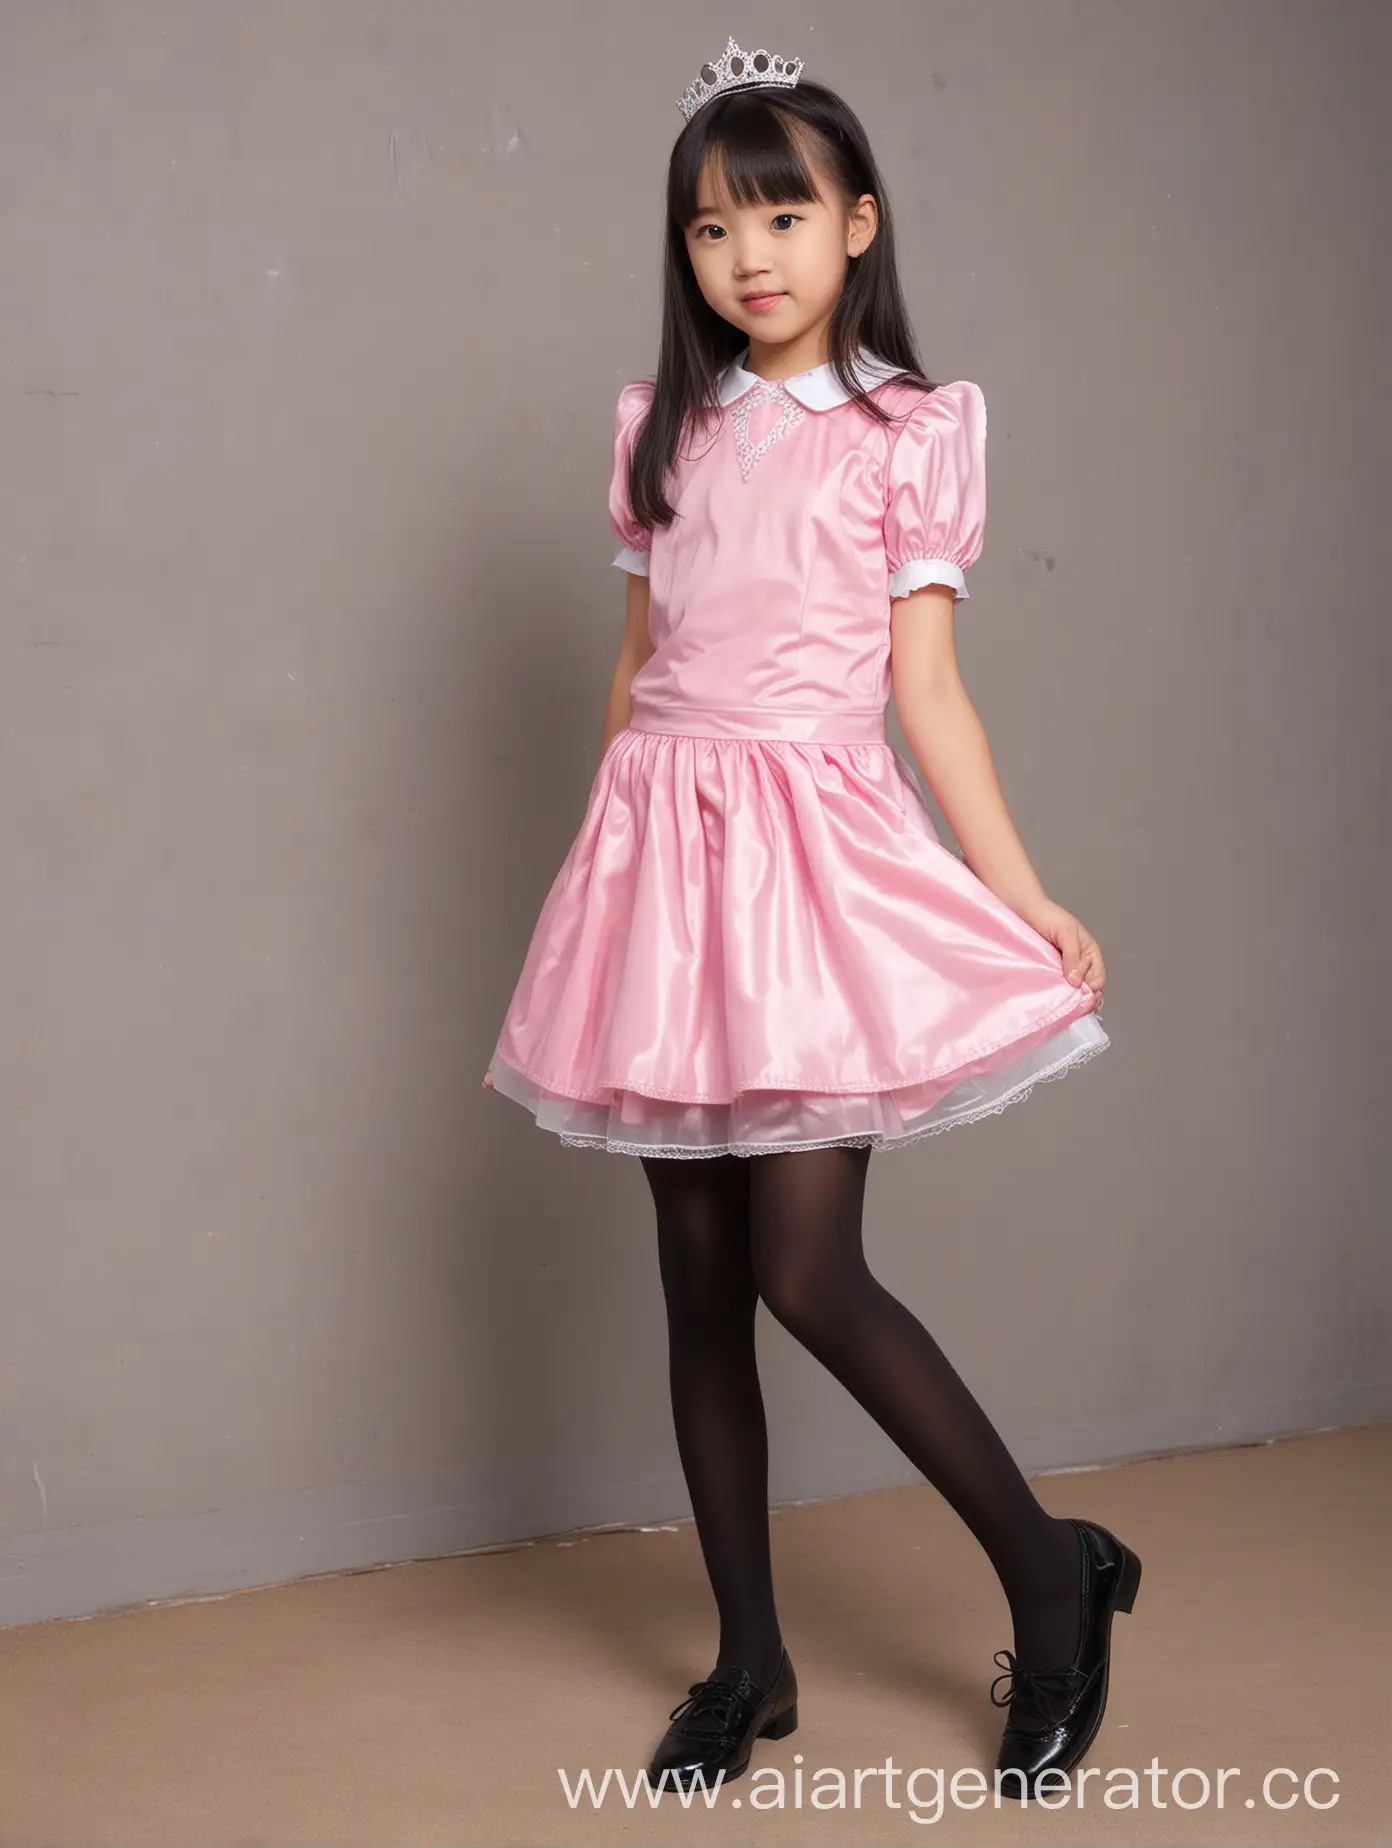 Asian-Elementary-School-Student-in-Pink-Princess-Dress-and-Leather-Shoes